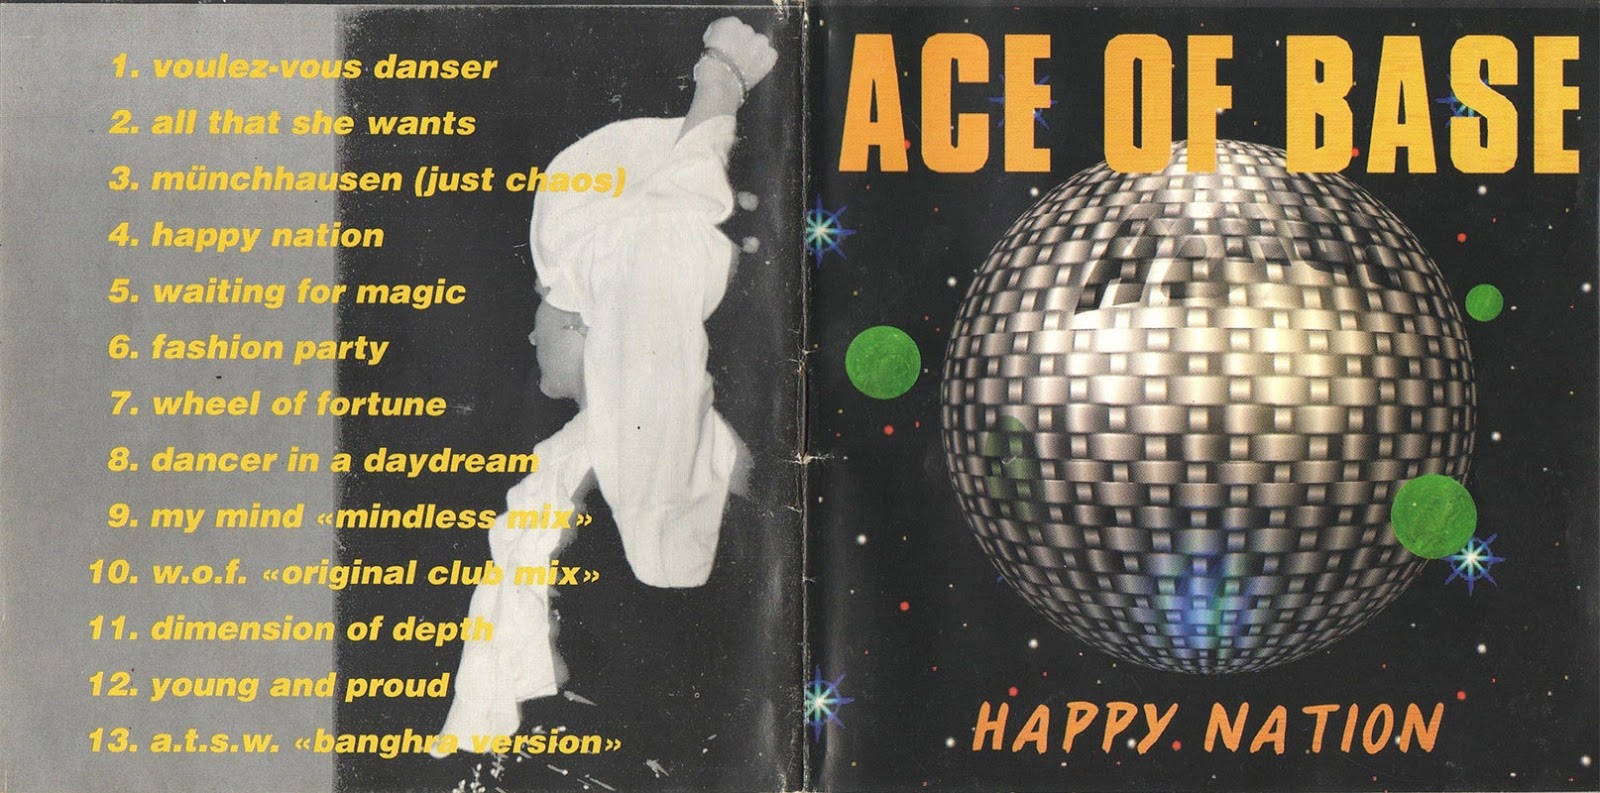 Happy nation смысл. Ace of Base 1992. Хэппи натион. Ace of Base Happy Nation. Ace of Base Happy Nation album.